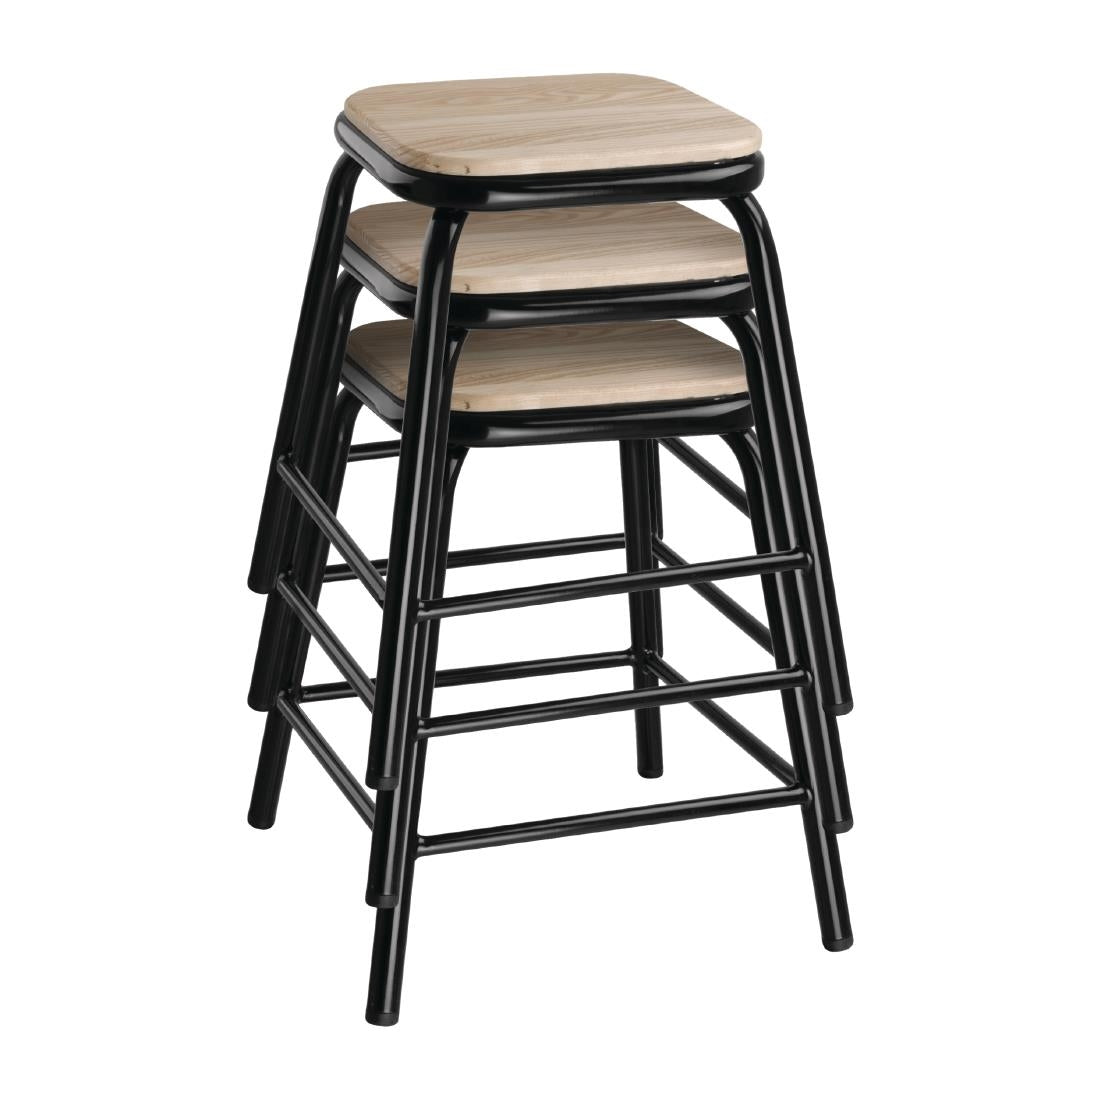 Bolero Cantina Stools with Wooden Seat Pad Black (Pack of 4) JD Catering Equipment Solutions Ltd